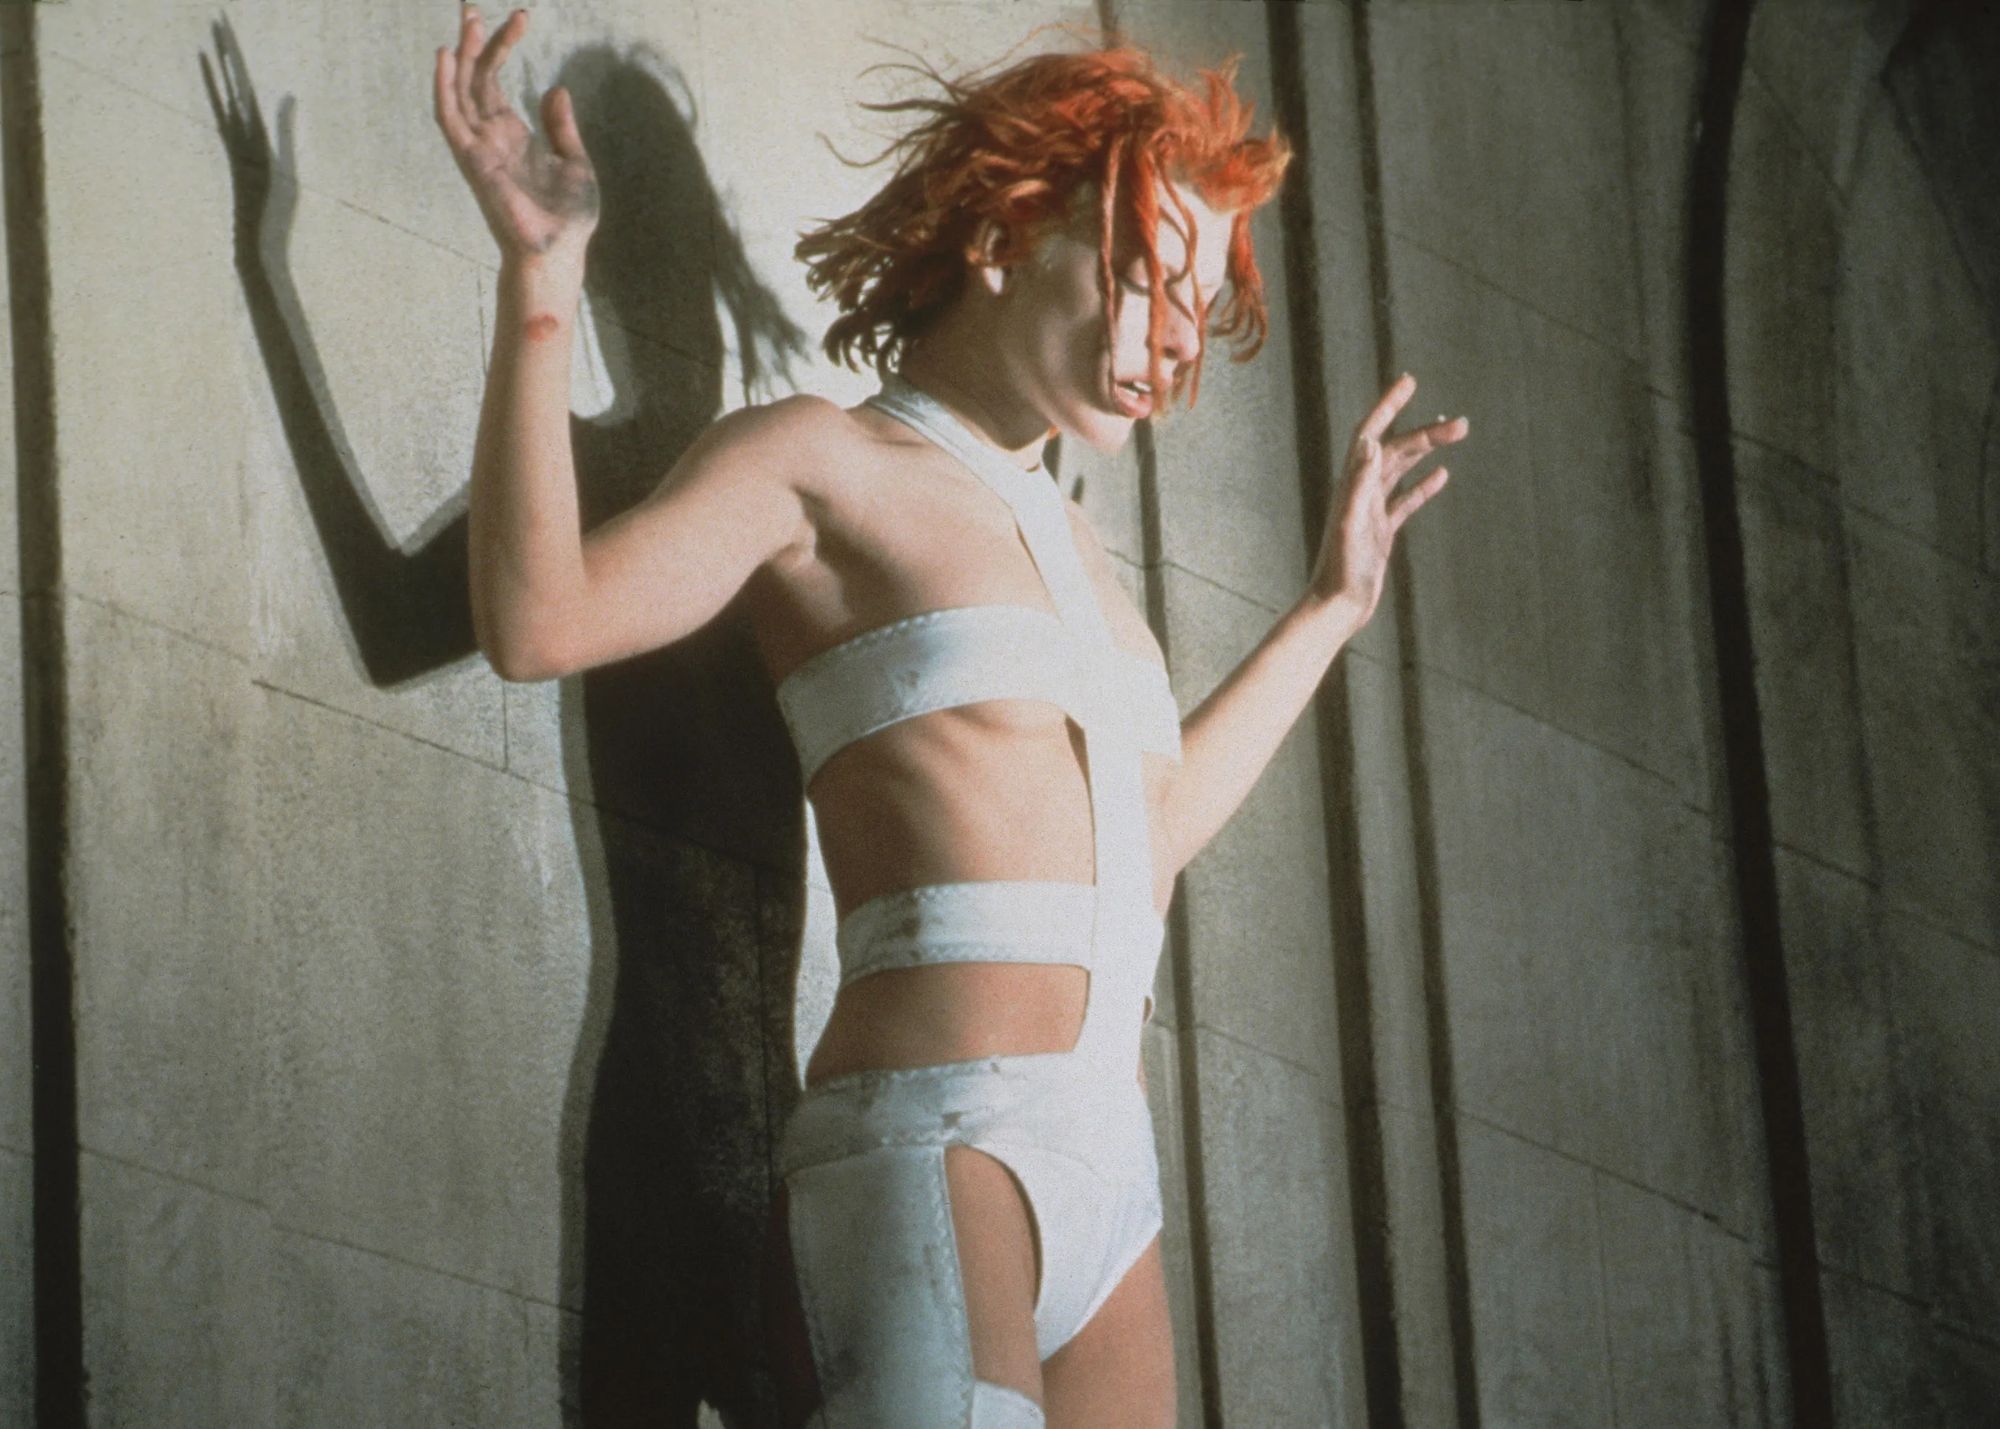 Milla Jovovich wears a white bandage bodysuit and an orange colored hair